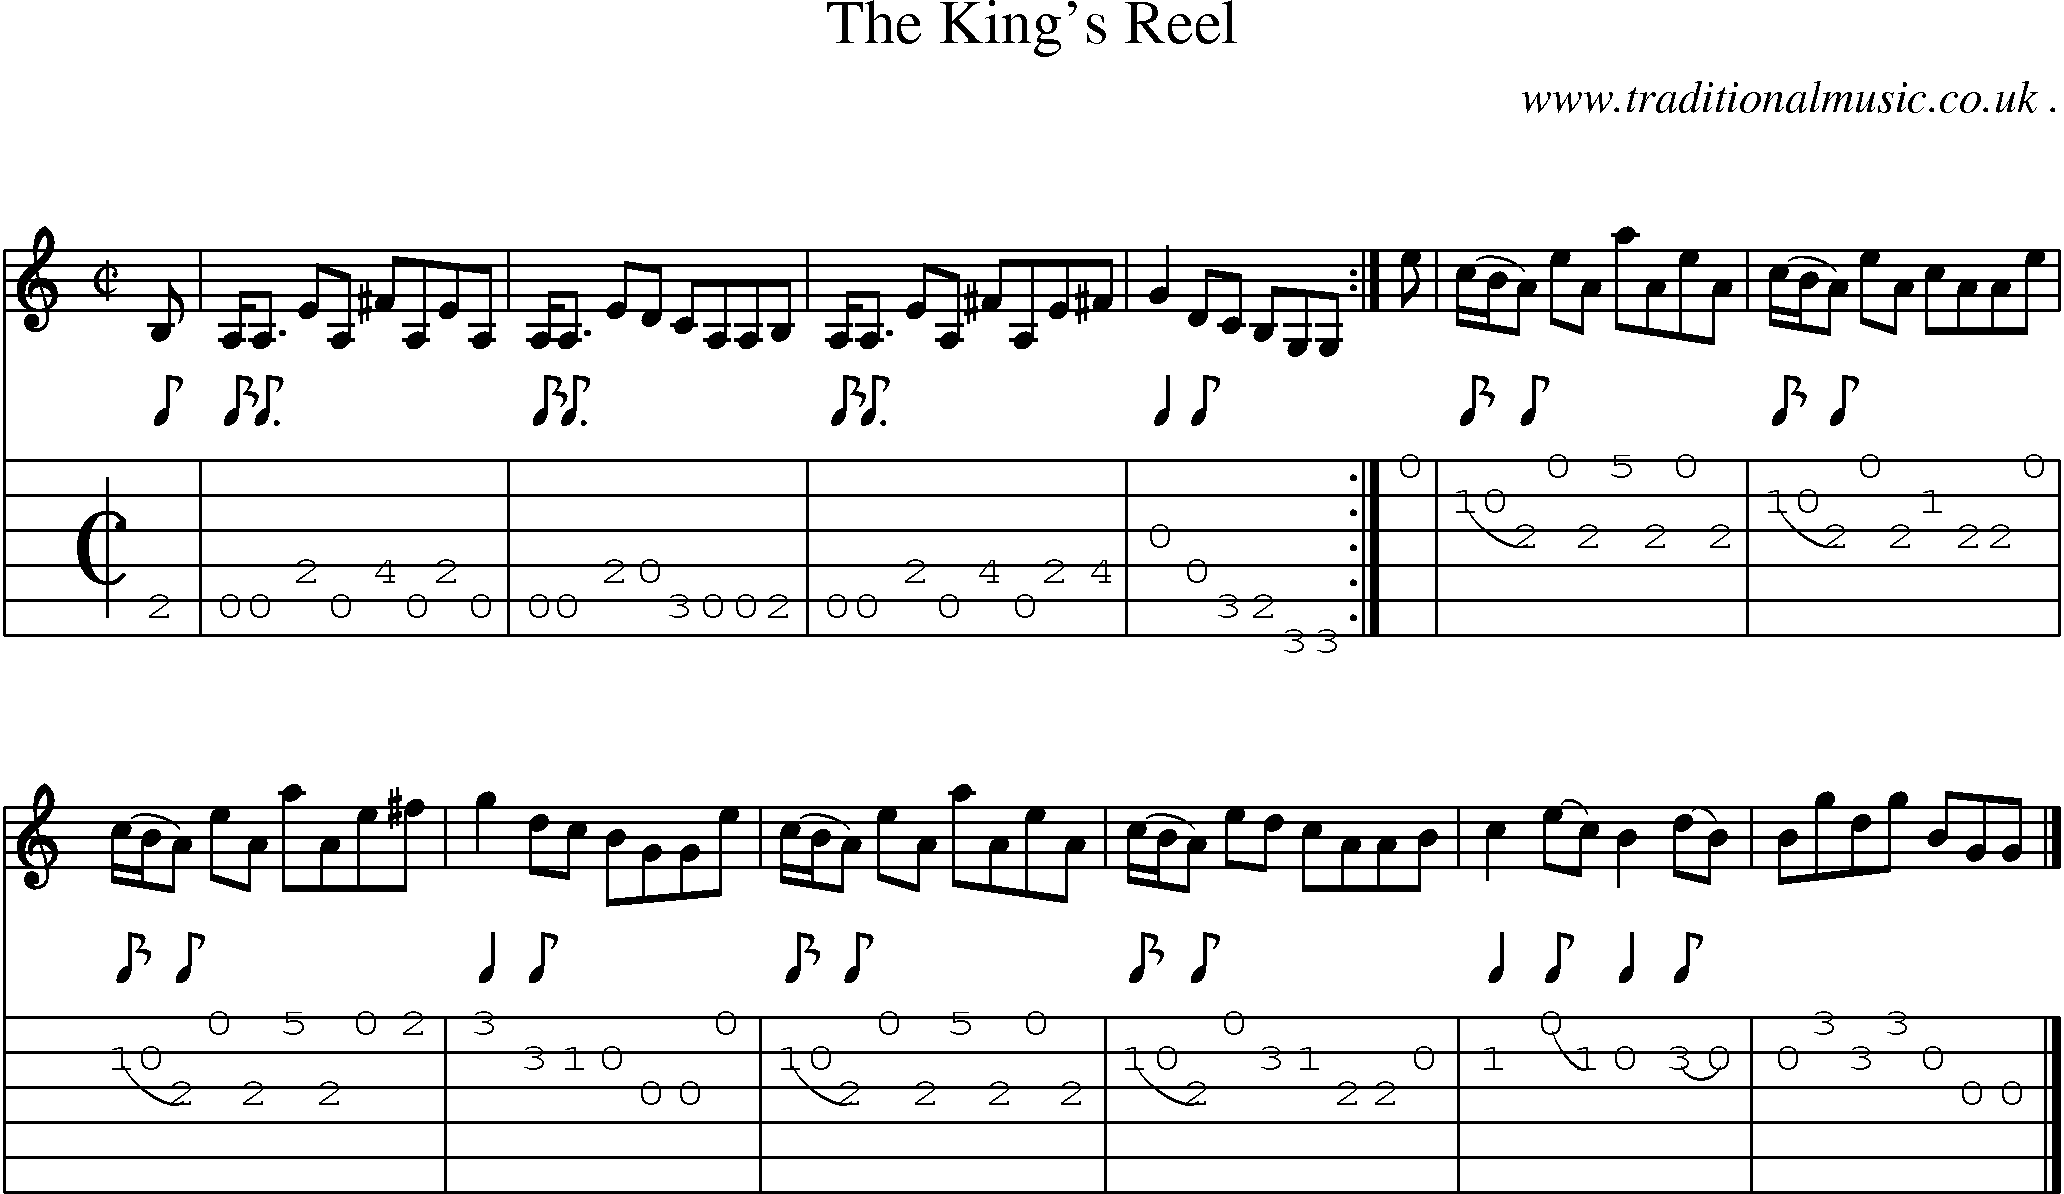 Sheet-music  score, Chords and Guitar Tabs for The Kings Reel